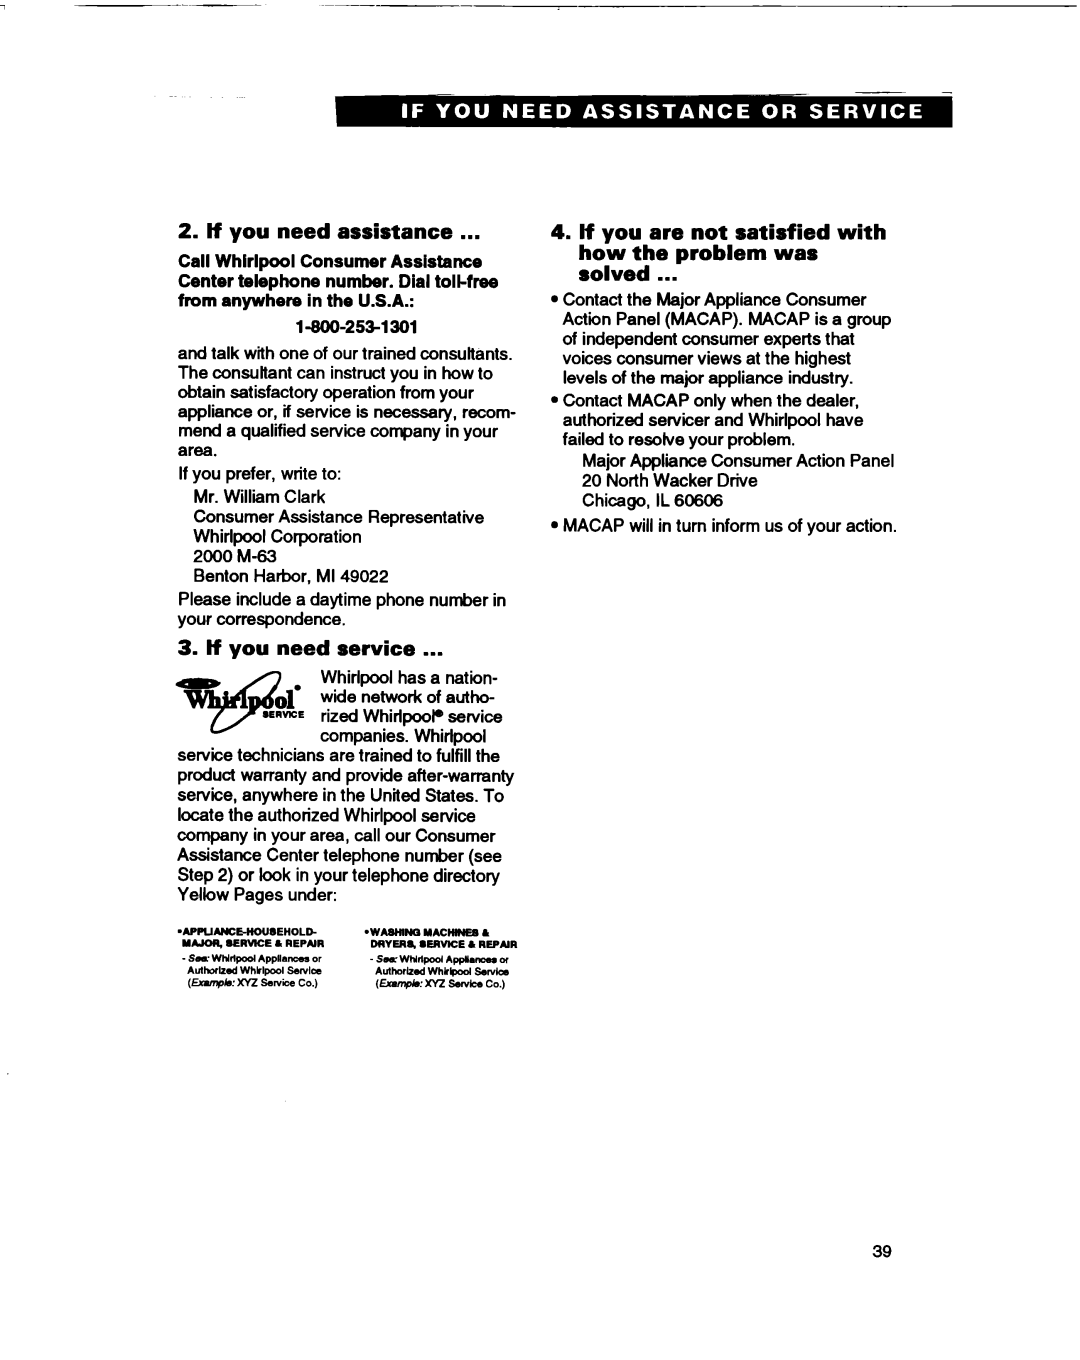 Whirlpool MT1061XB installation instructions tf you need assistance, If you need service 